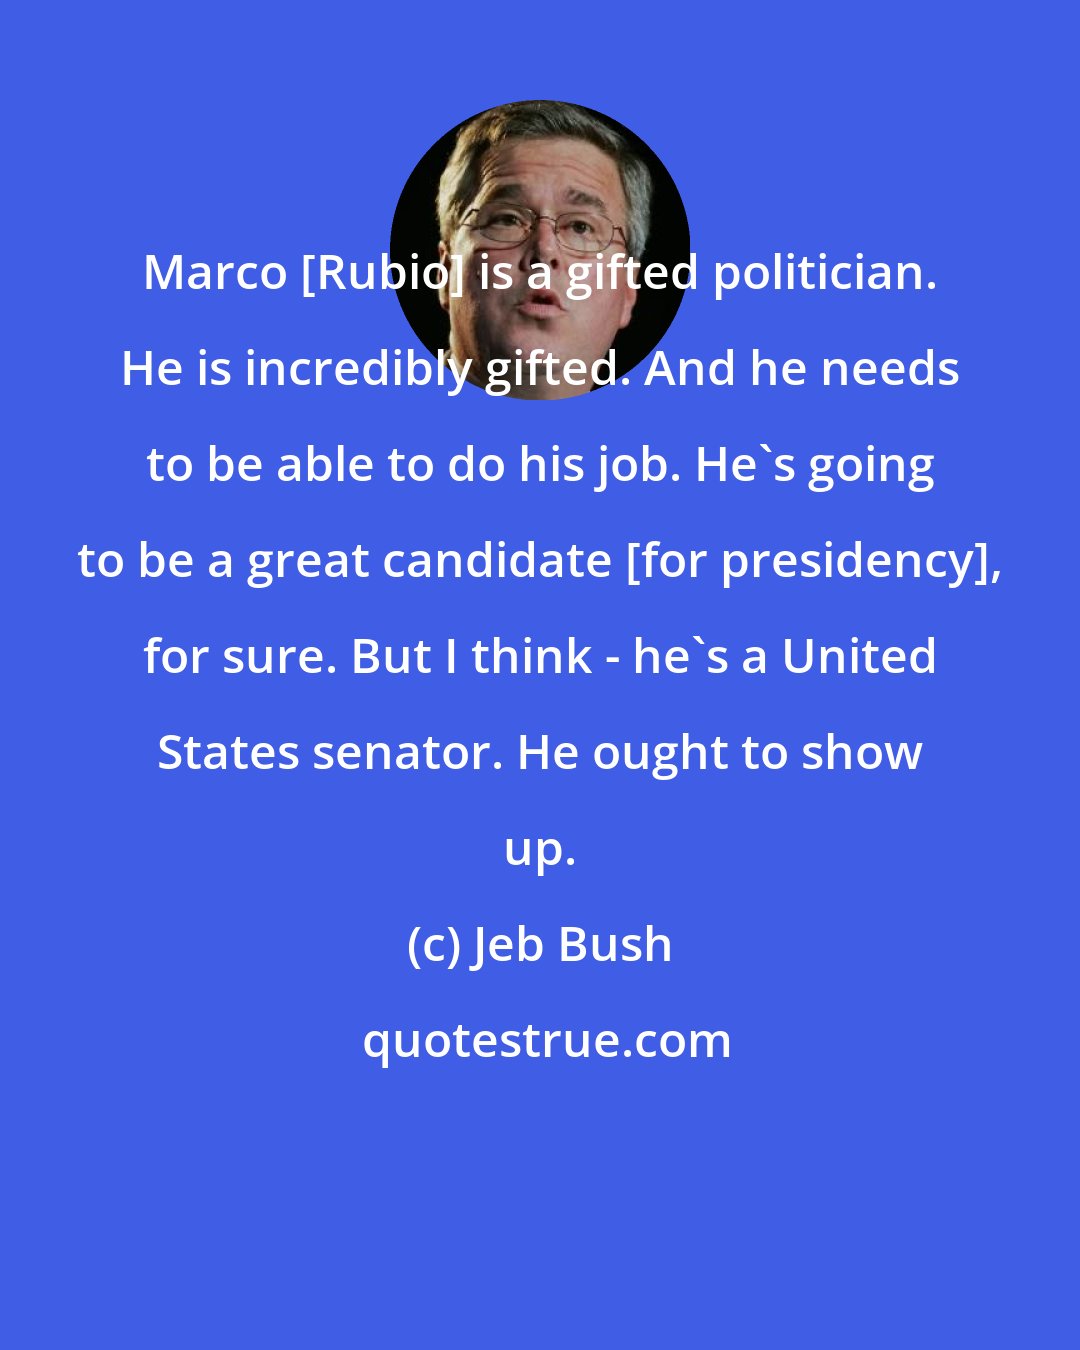 Jeb Bush: Marco [Rubio] is a gifted politician. He is incredibly gifted. And he needs to be able to do his job. He's going to be a great candidate [for presidency], for sure. But I think - he's a United States senator. He ought to show up.